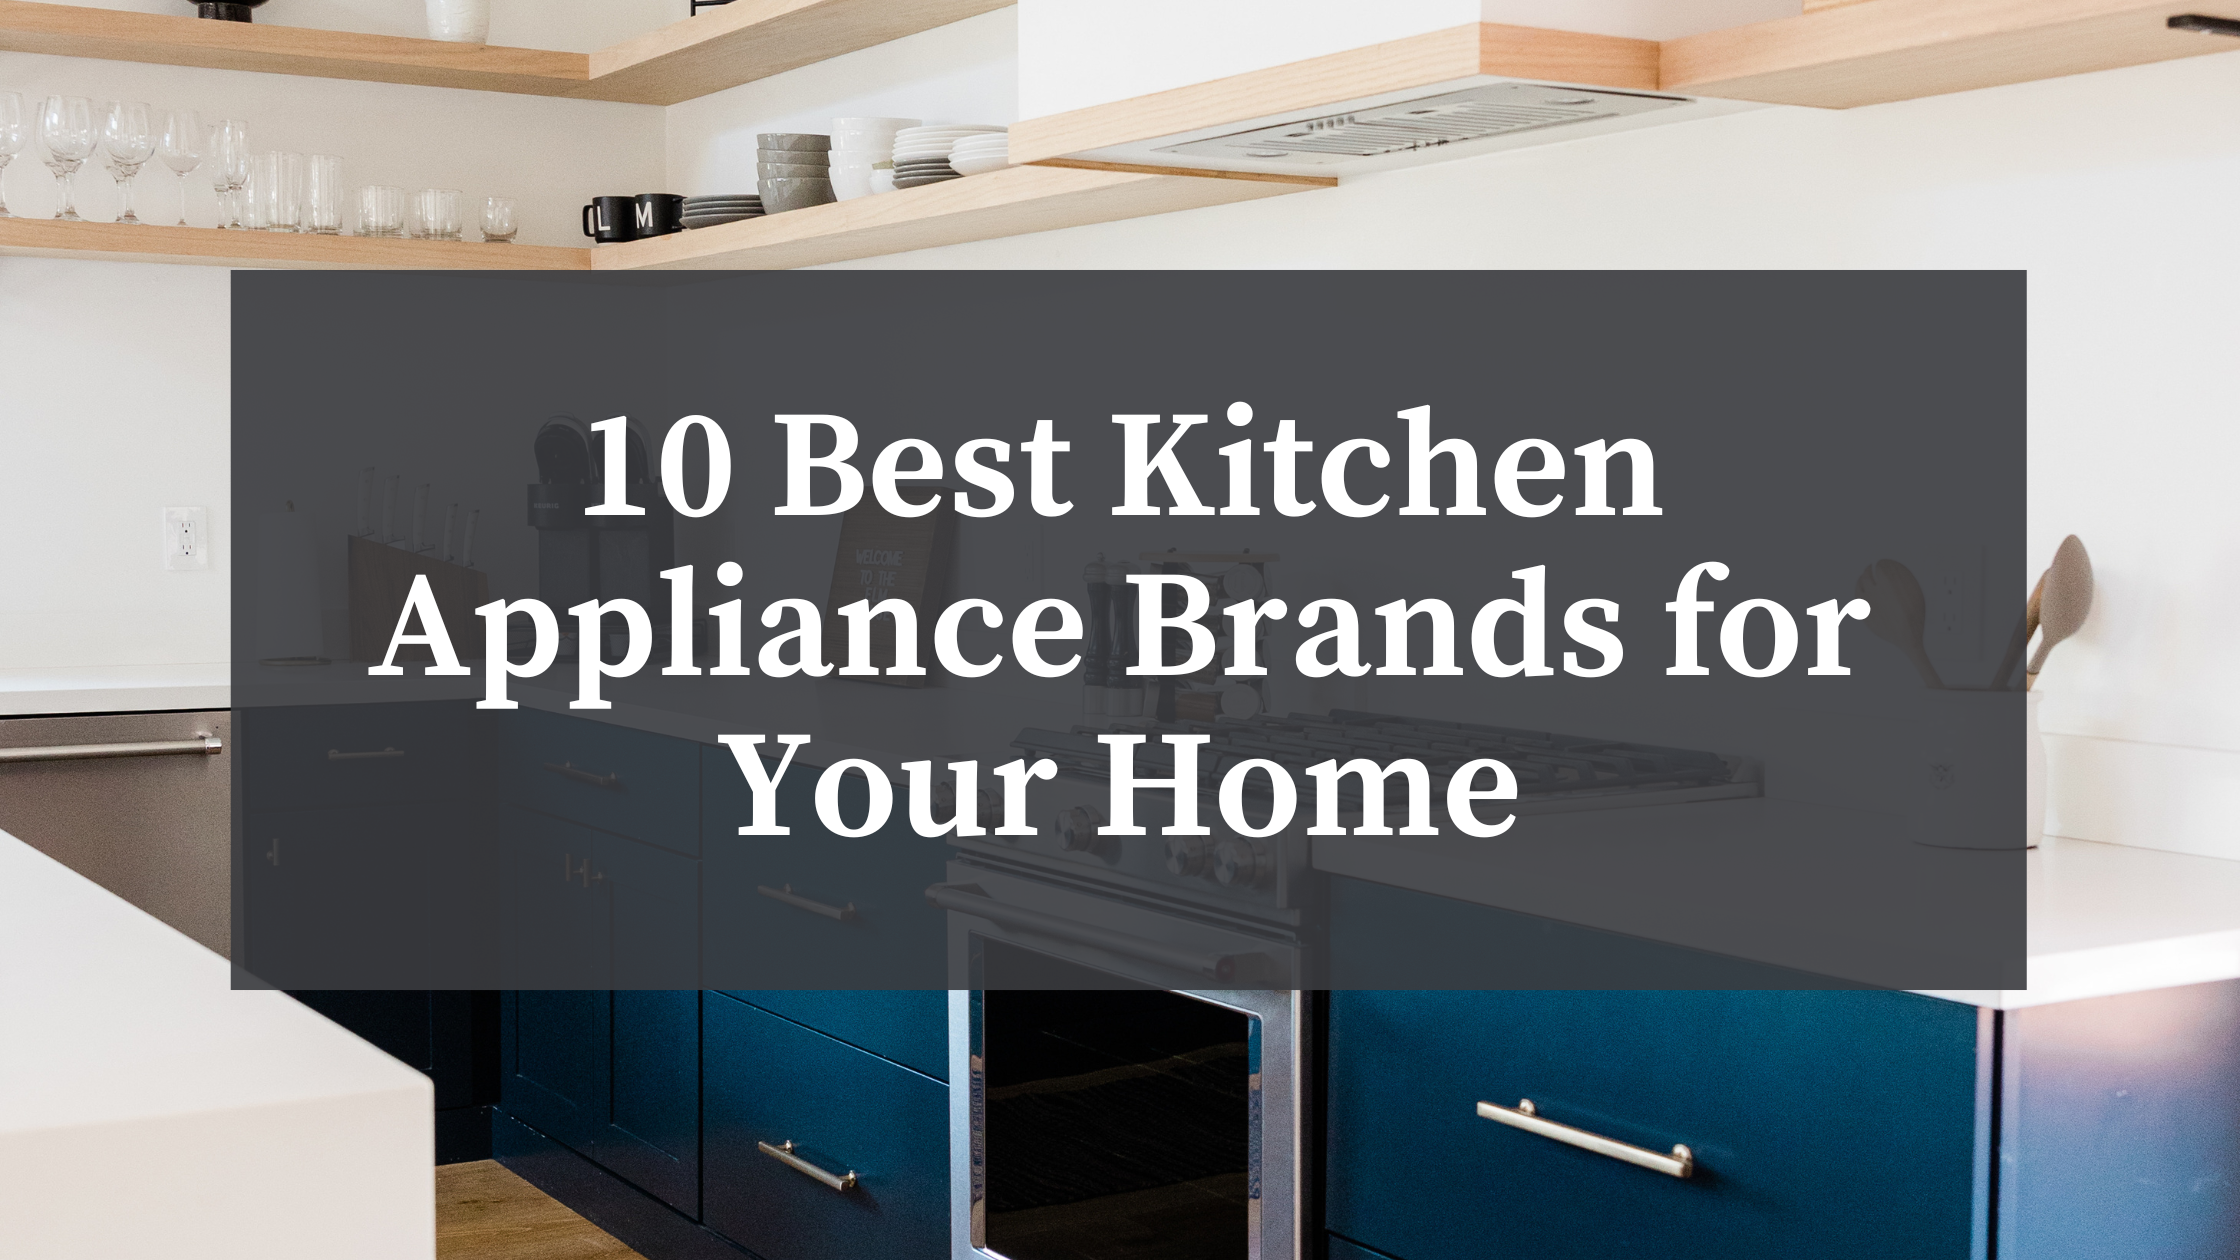 Top Brands Battle: Who Leads in Small Kitchen Appliances?